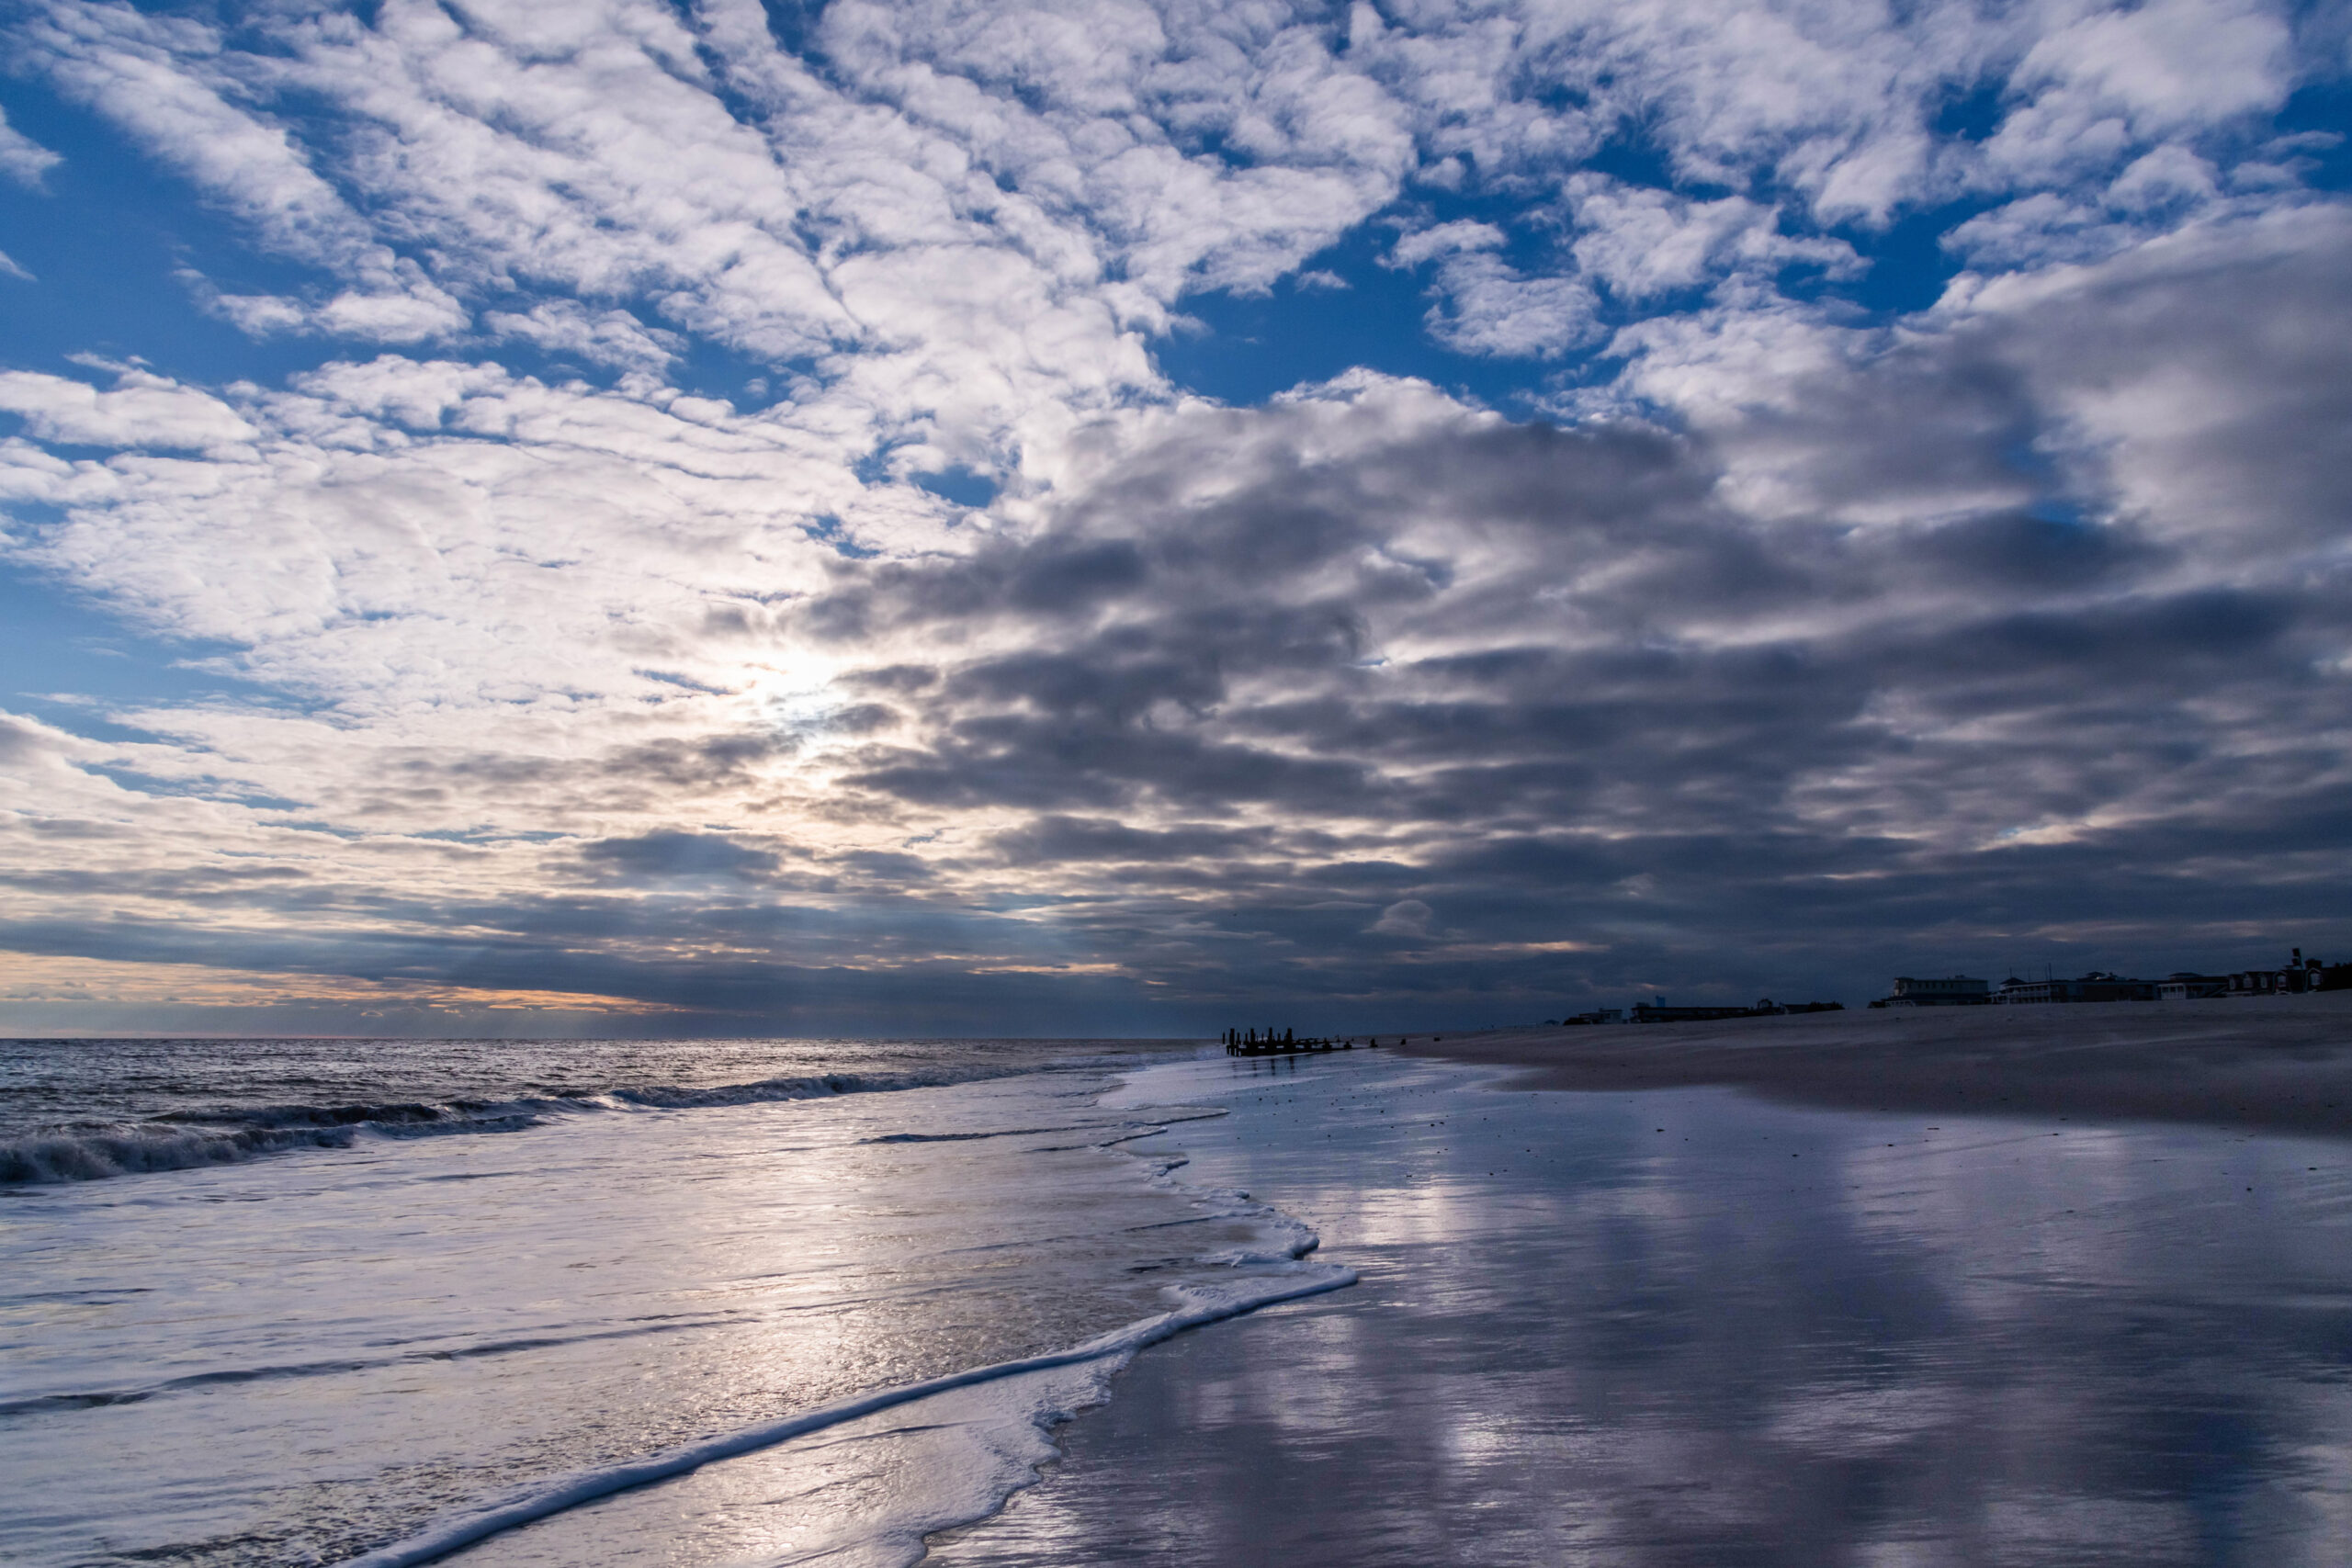 The ocean rushing into the beach with the sun and blue sky breaking through clouds. The sky and clouds are reflected in the shoreline.